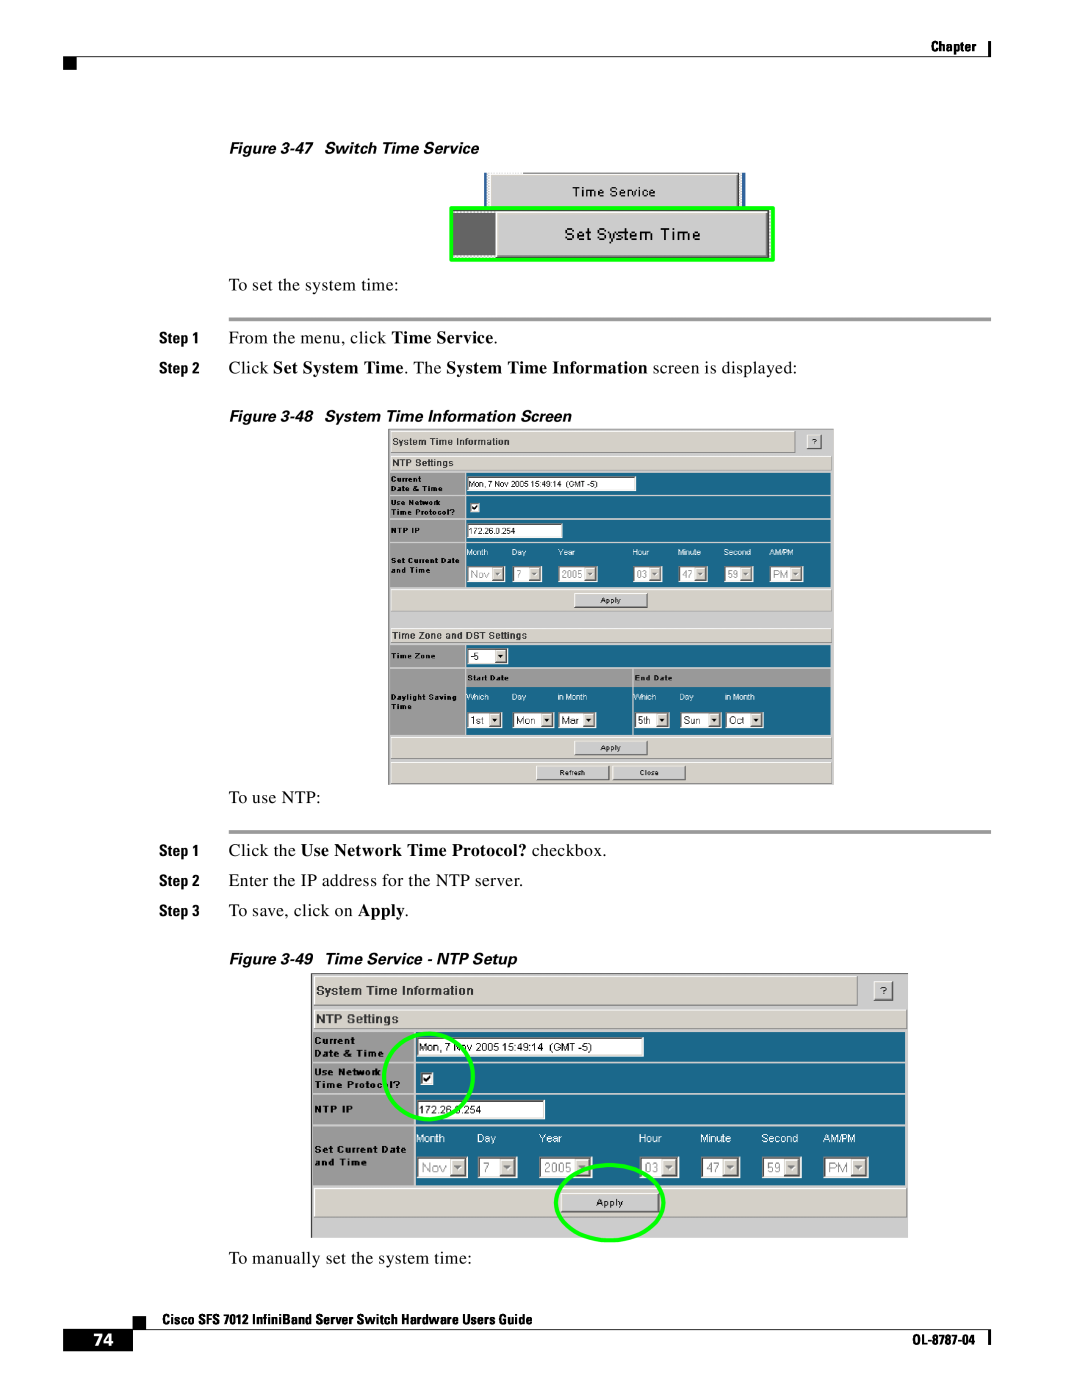 Cisco Systems SFS 7012 47 Switch Time Service, 48 System Time Information Screen, 49 Time Service - NTP Setup, Chapter 